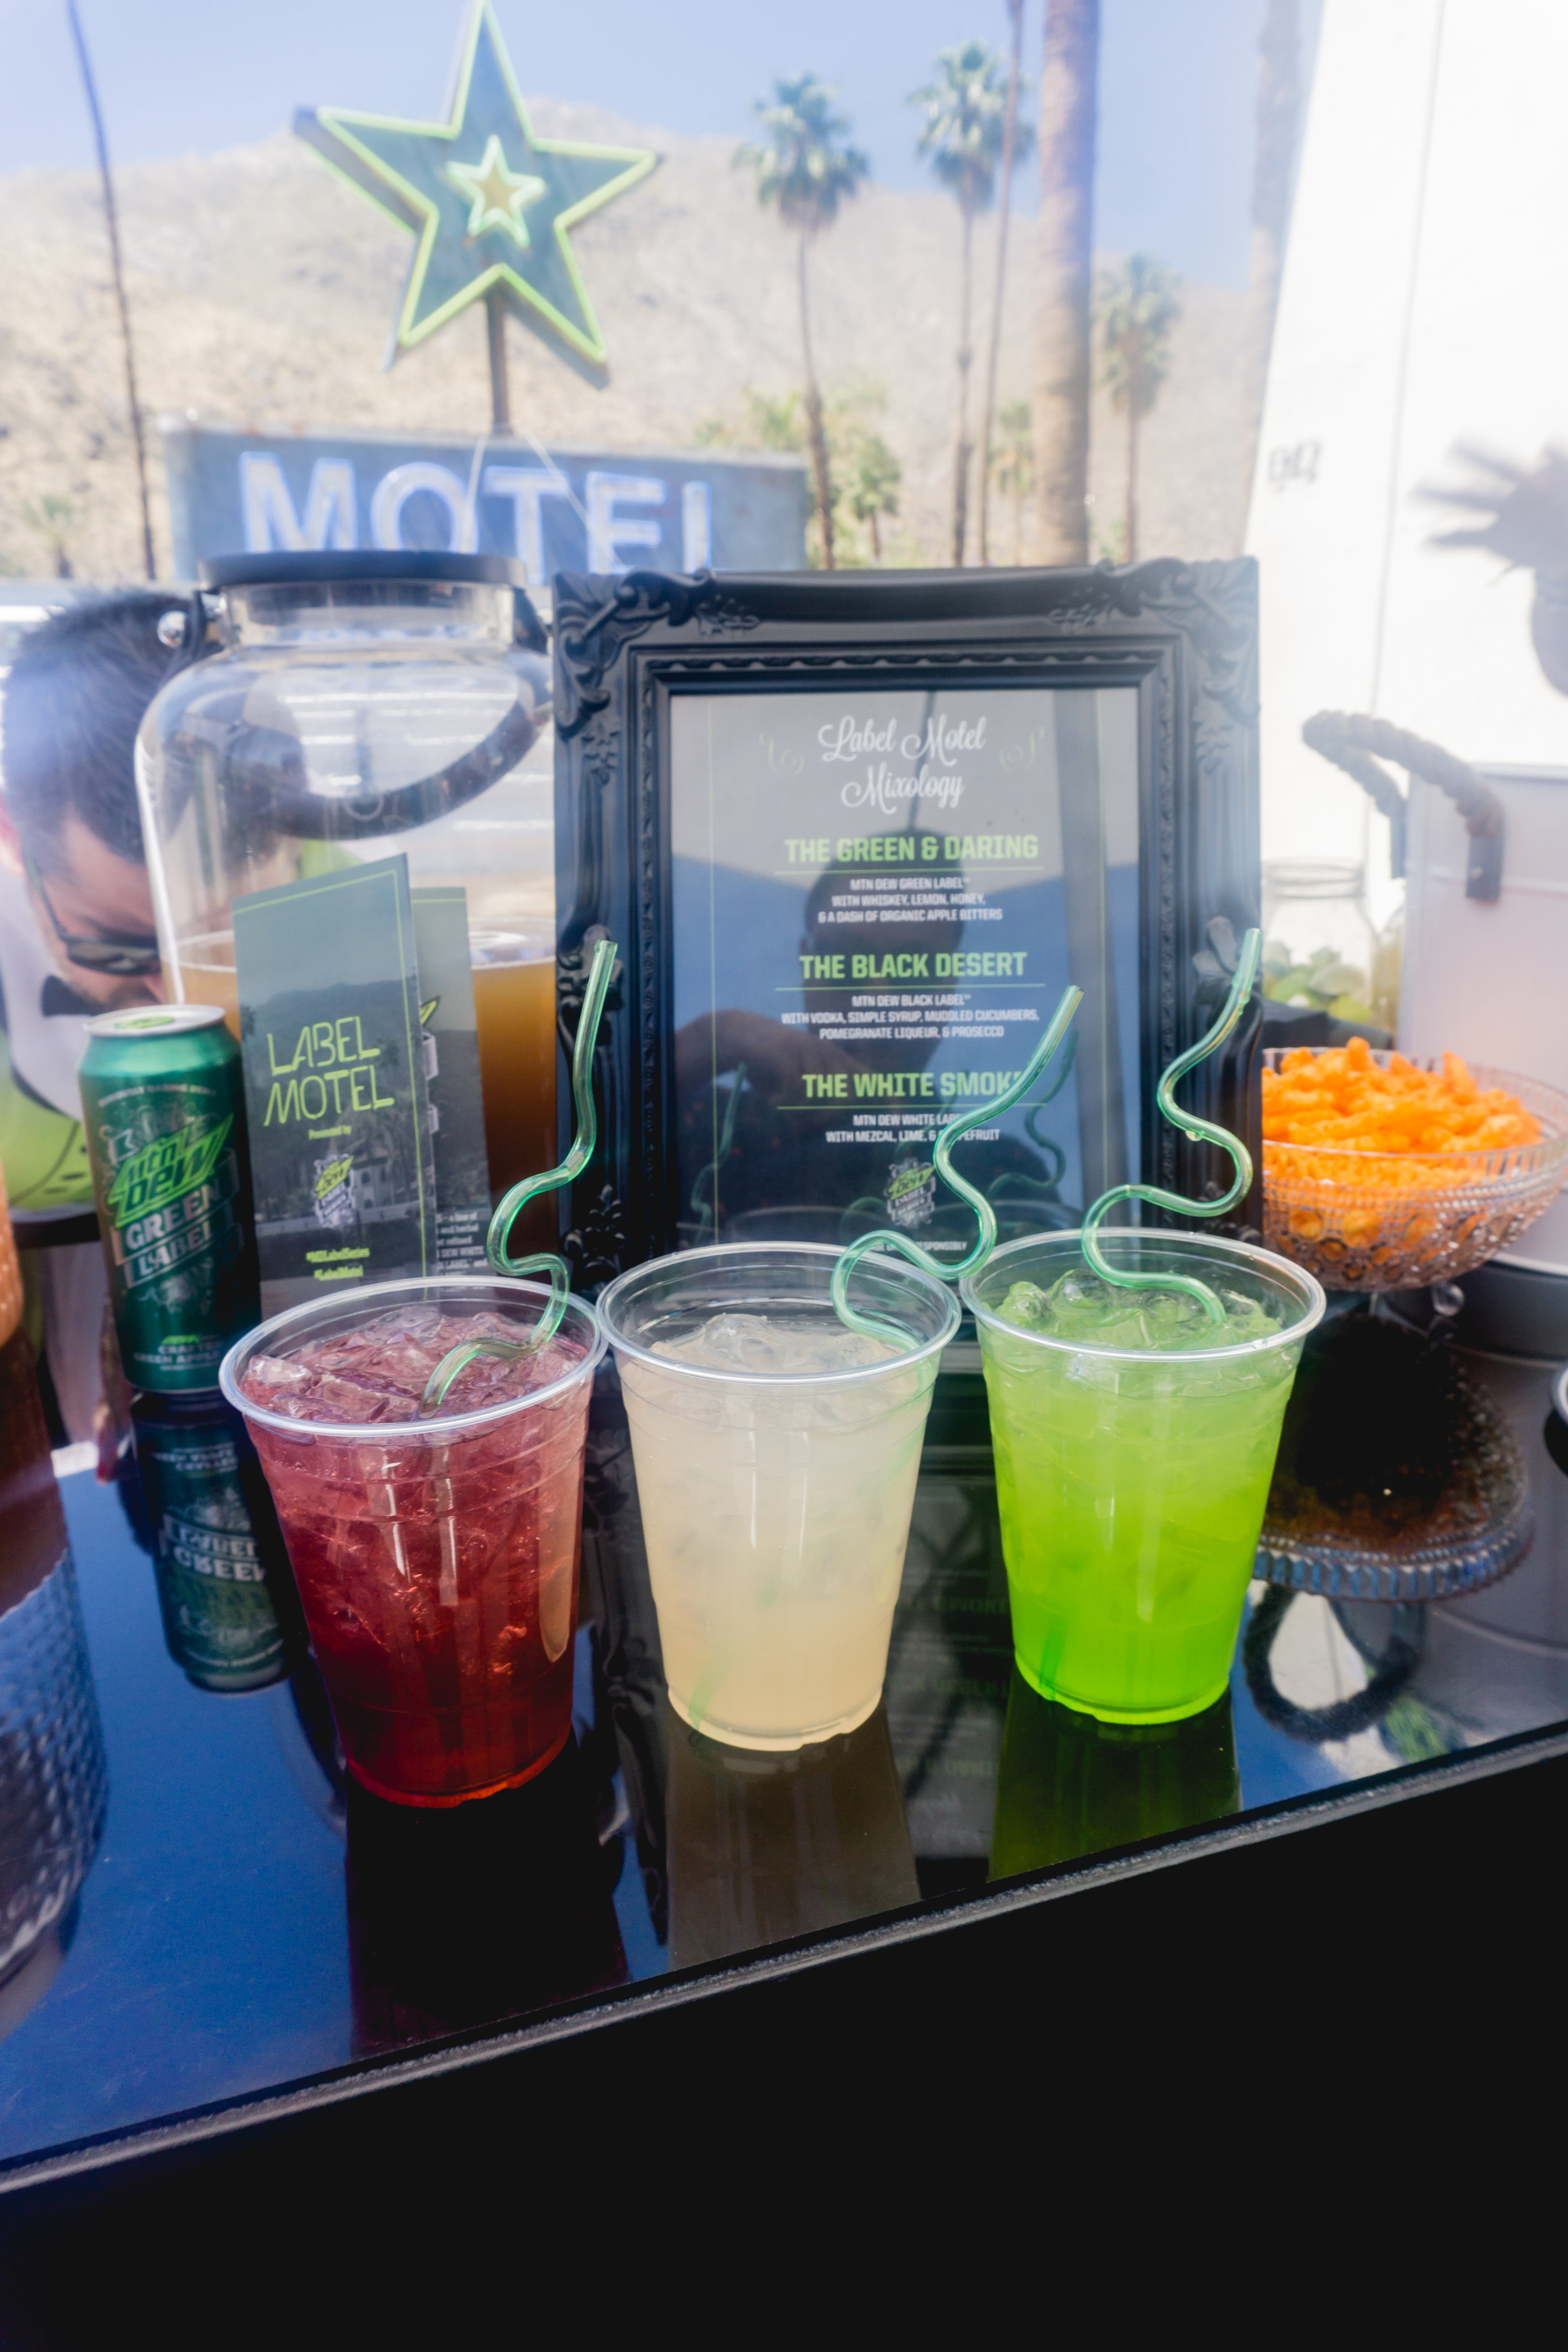 All cocktails and food were infused with Mountain Dew's new drinks. They were all tasty!